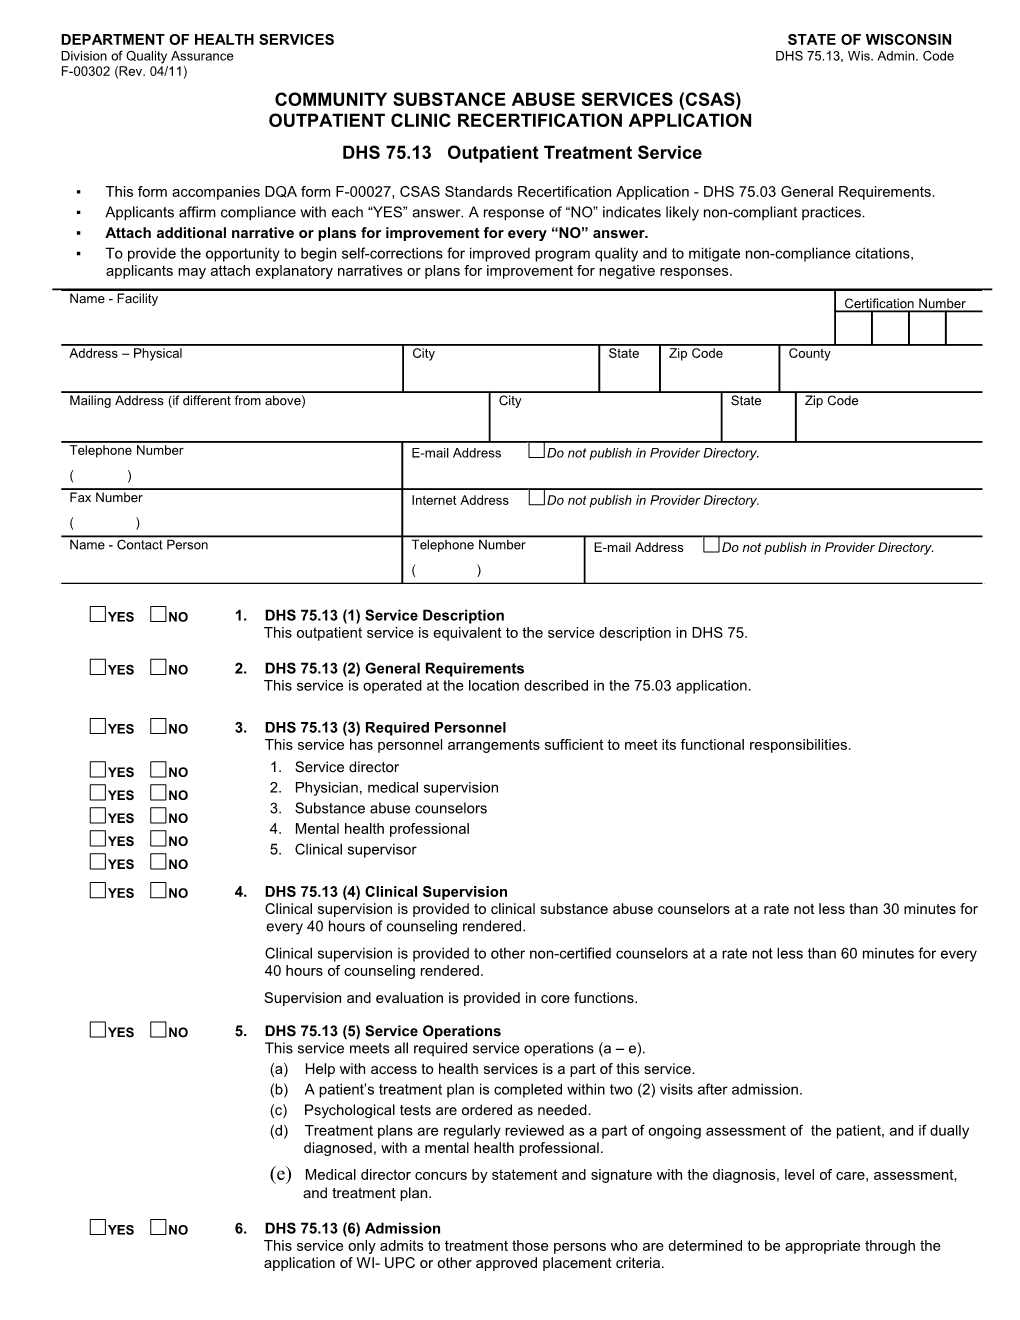 Community Substance Abuse Services (CSAS) Outpatient Clinic Renewal Application - DHS 75.13